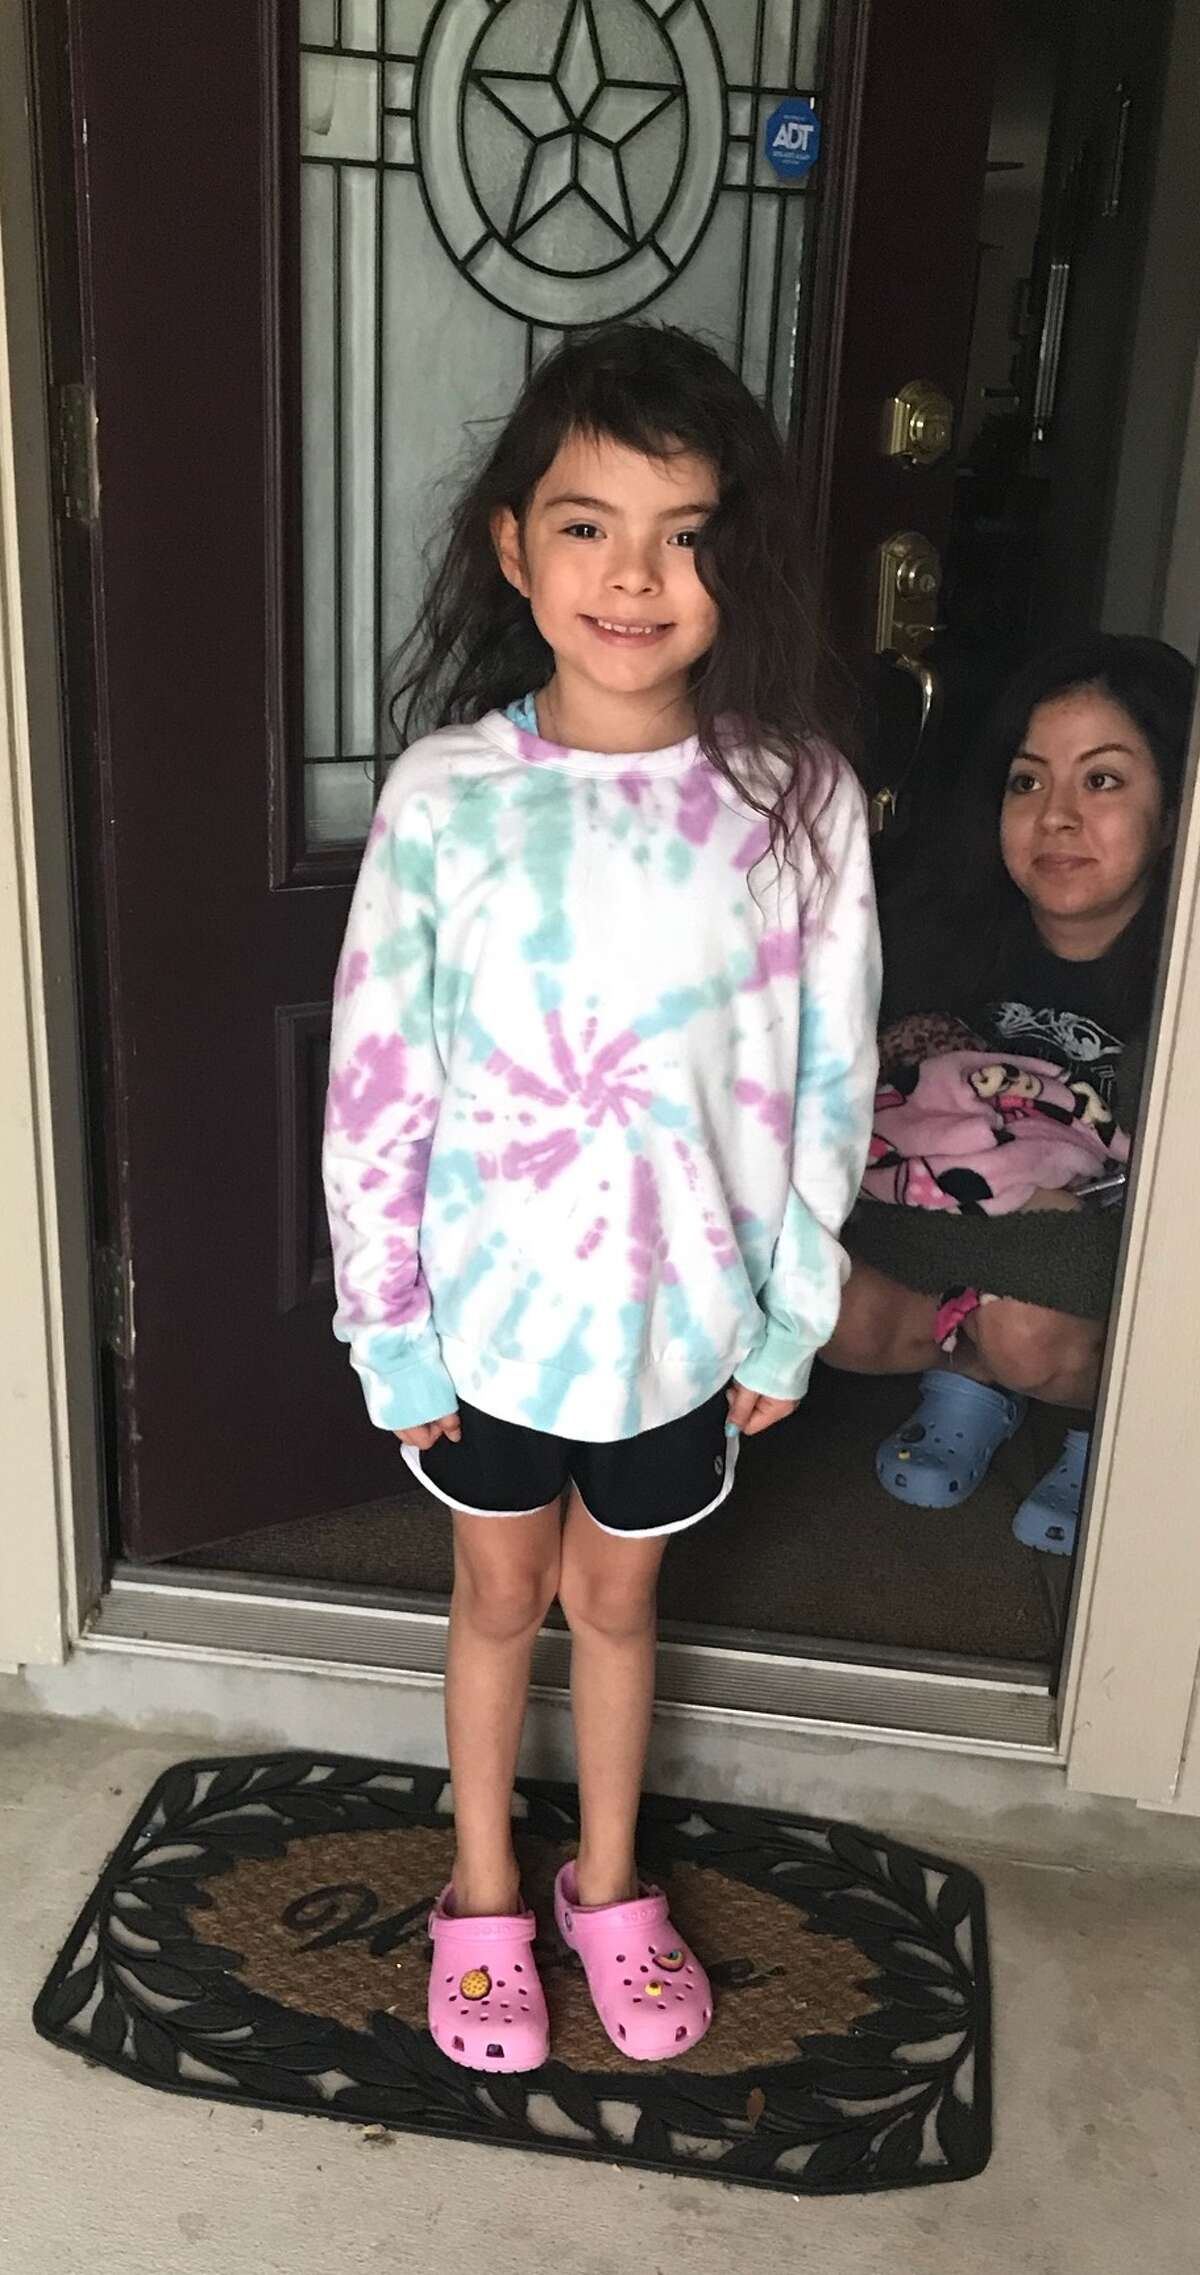 New Braunfels 8-year-old Kiley Diaz, who was reported missing, was found Saturday and police said charges may be brought against her mother, 29-year-old Alyssa Lopez, officials said.